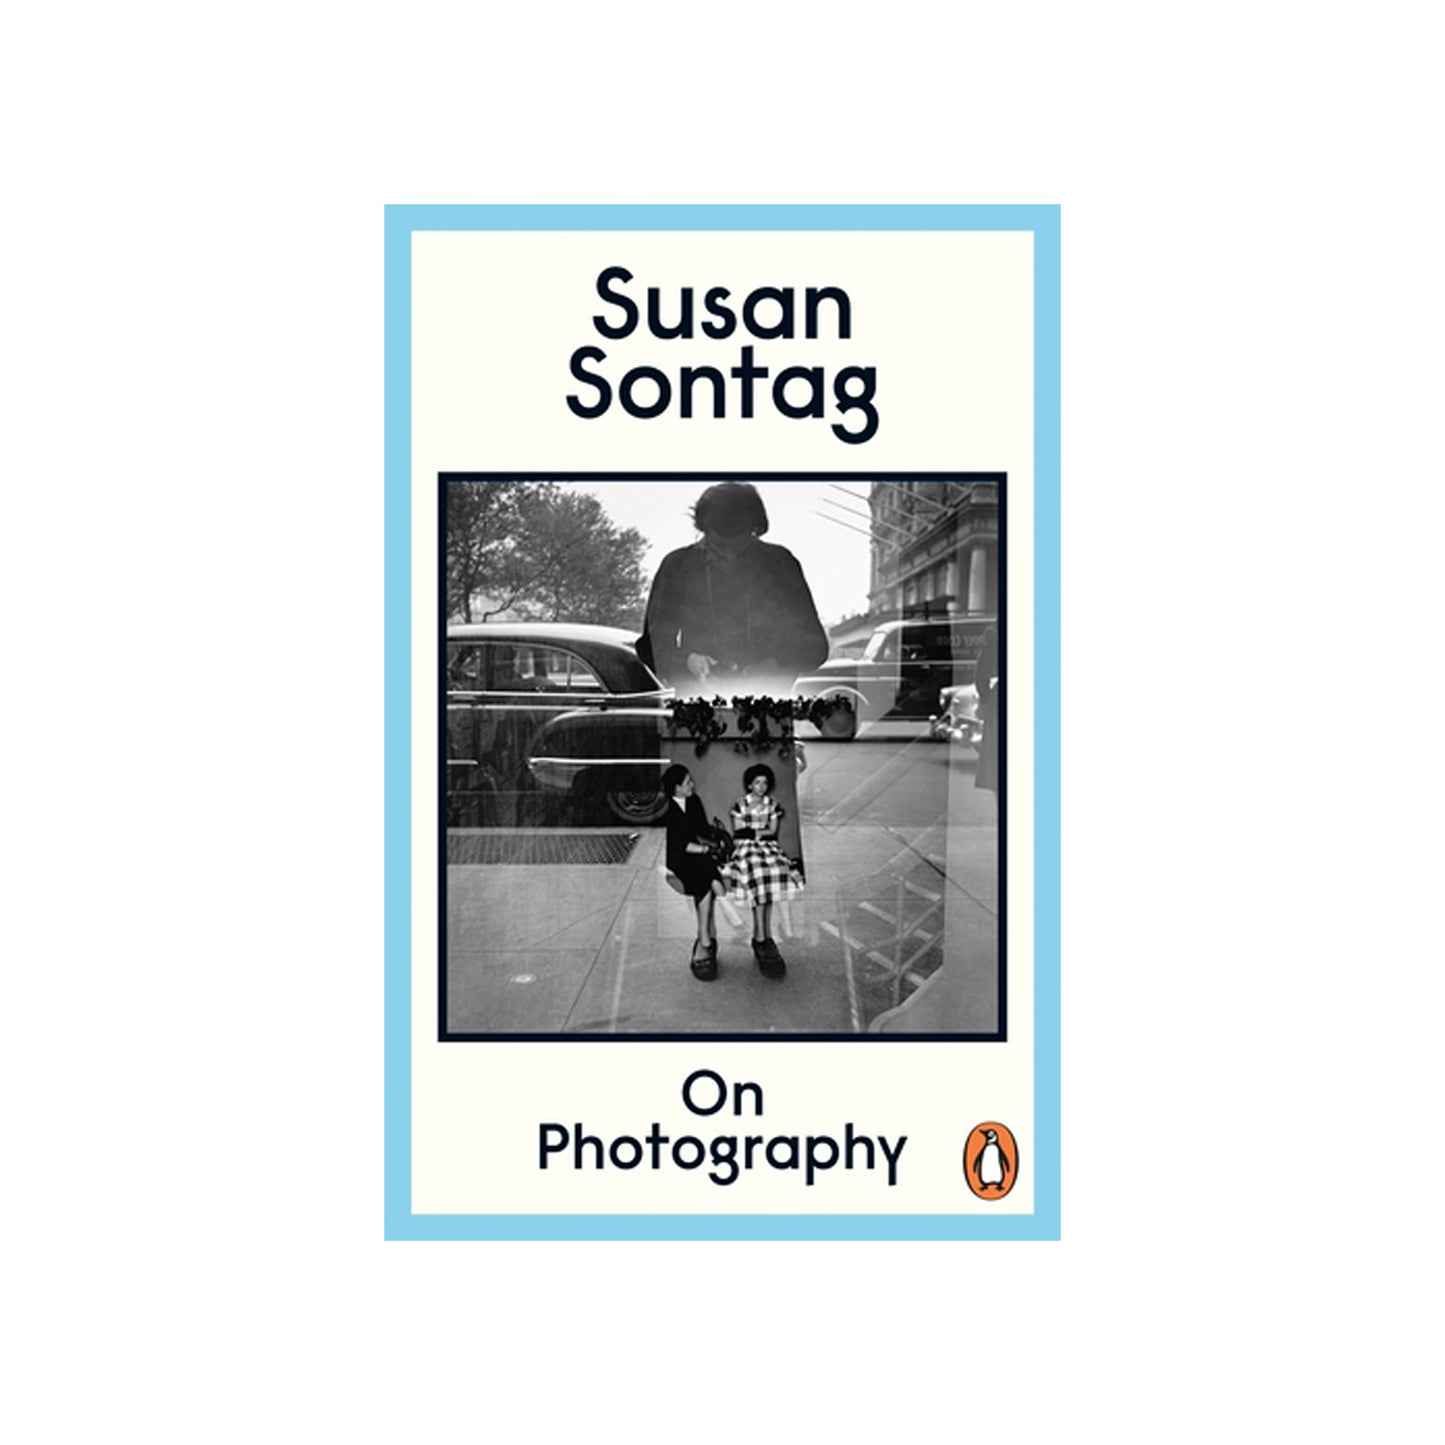 On Photography by Susan Sontag Photo Museum Ireland